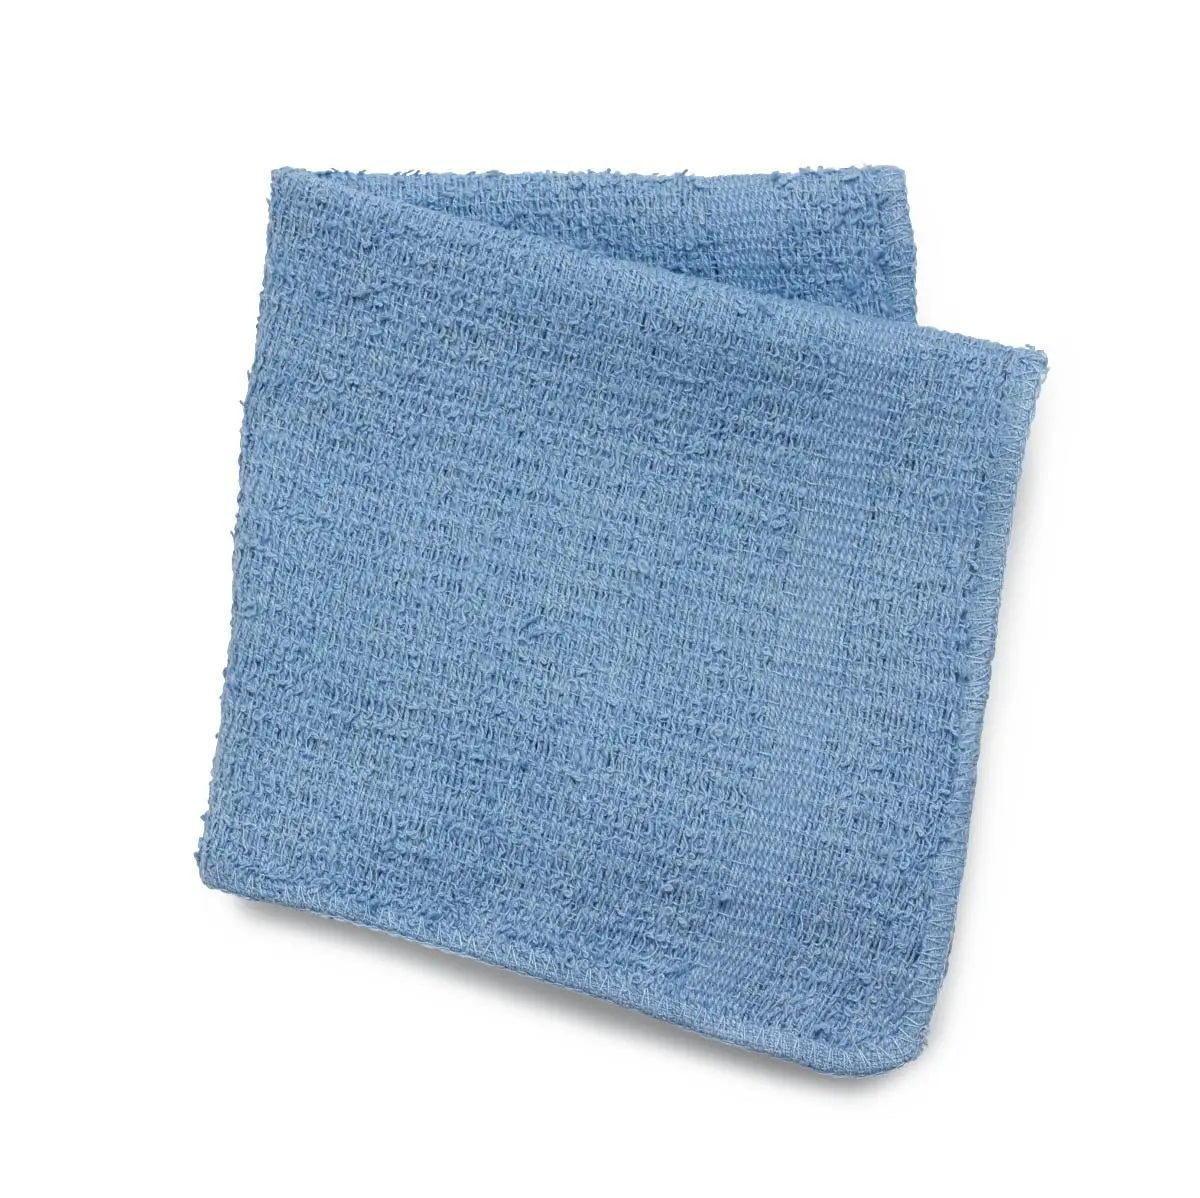 MDL MDTWC3C08BL CS/120  WASH CLOTH FOR PERI_CARE 11" X 11" 100% COTON TERRIES 60 PER POLY PACK BLUE